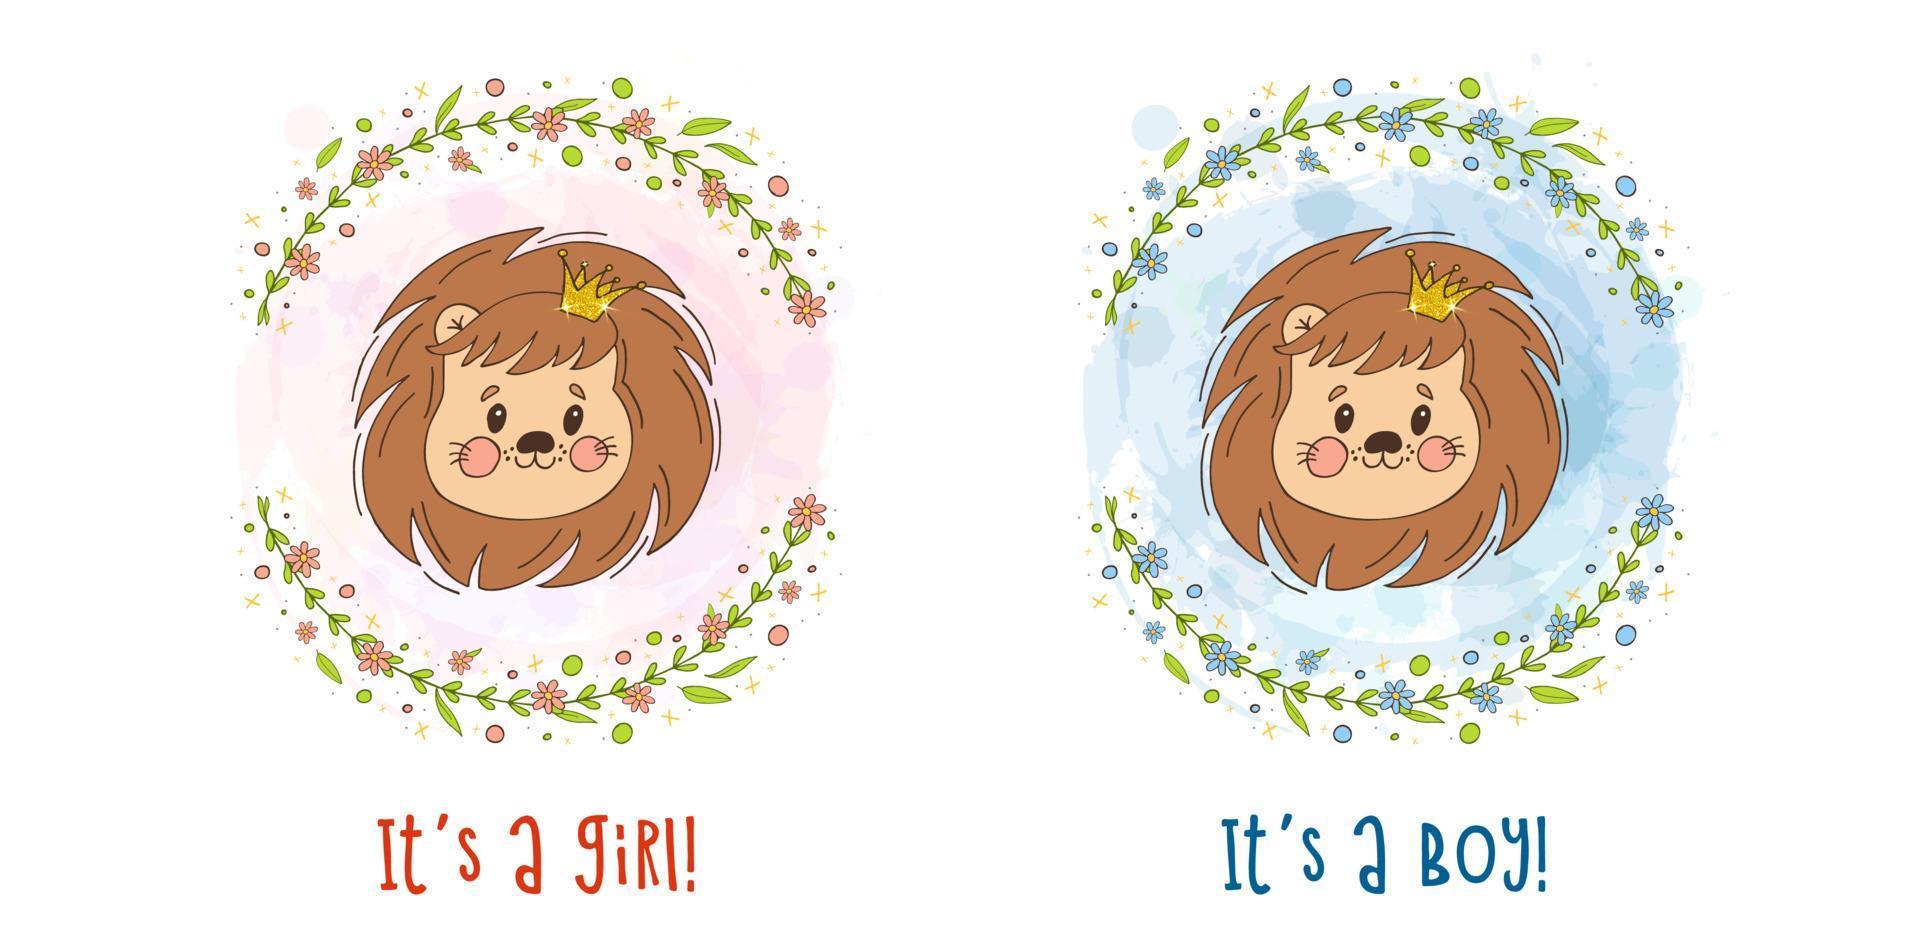 Cute lion cub winh gold crown on a pink and blue watercolor background with a flower frame. Hand drawn doodle vector illustration. It's a boy, it's a girl.